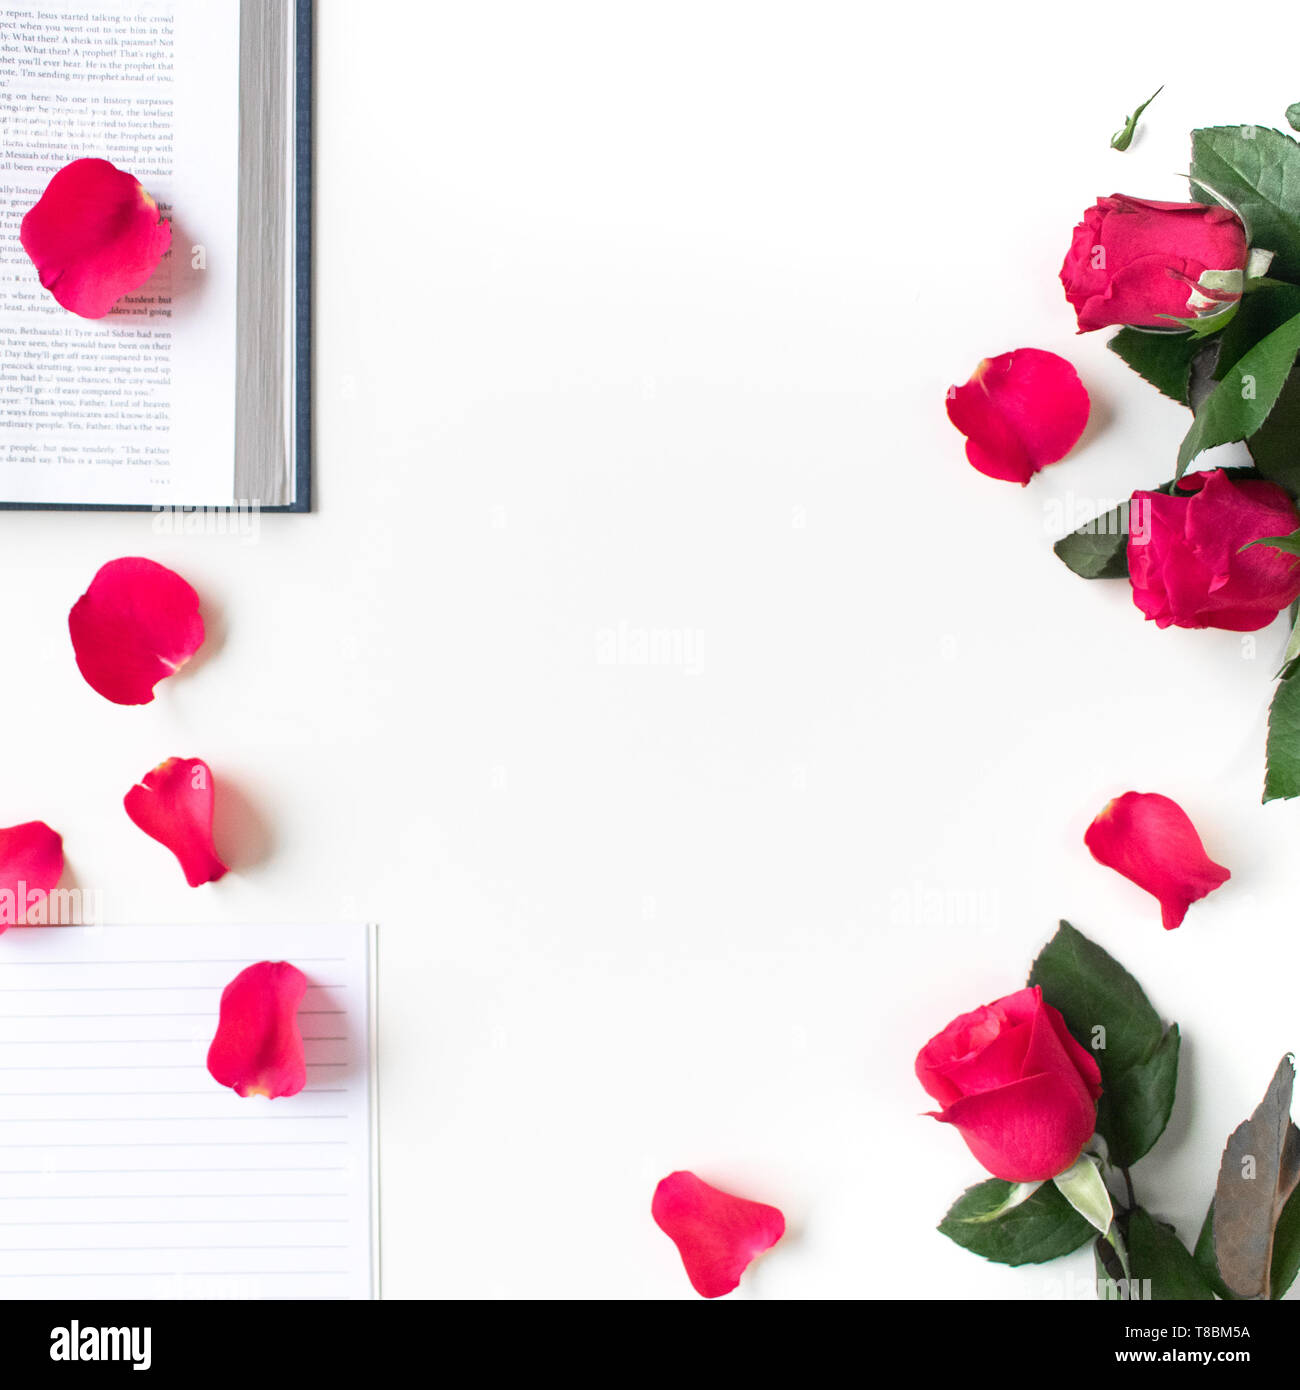 Red rose, red petals and a Bible on a white table. Clean white background. Stock Photo